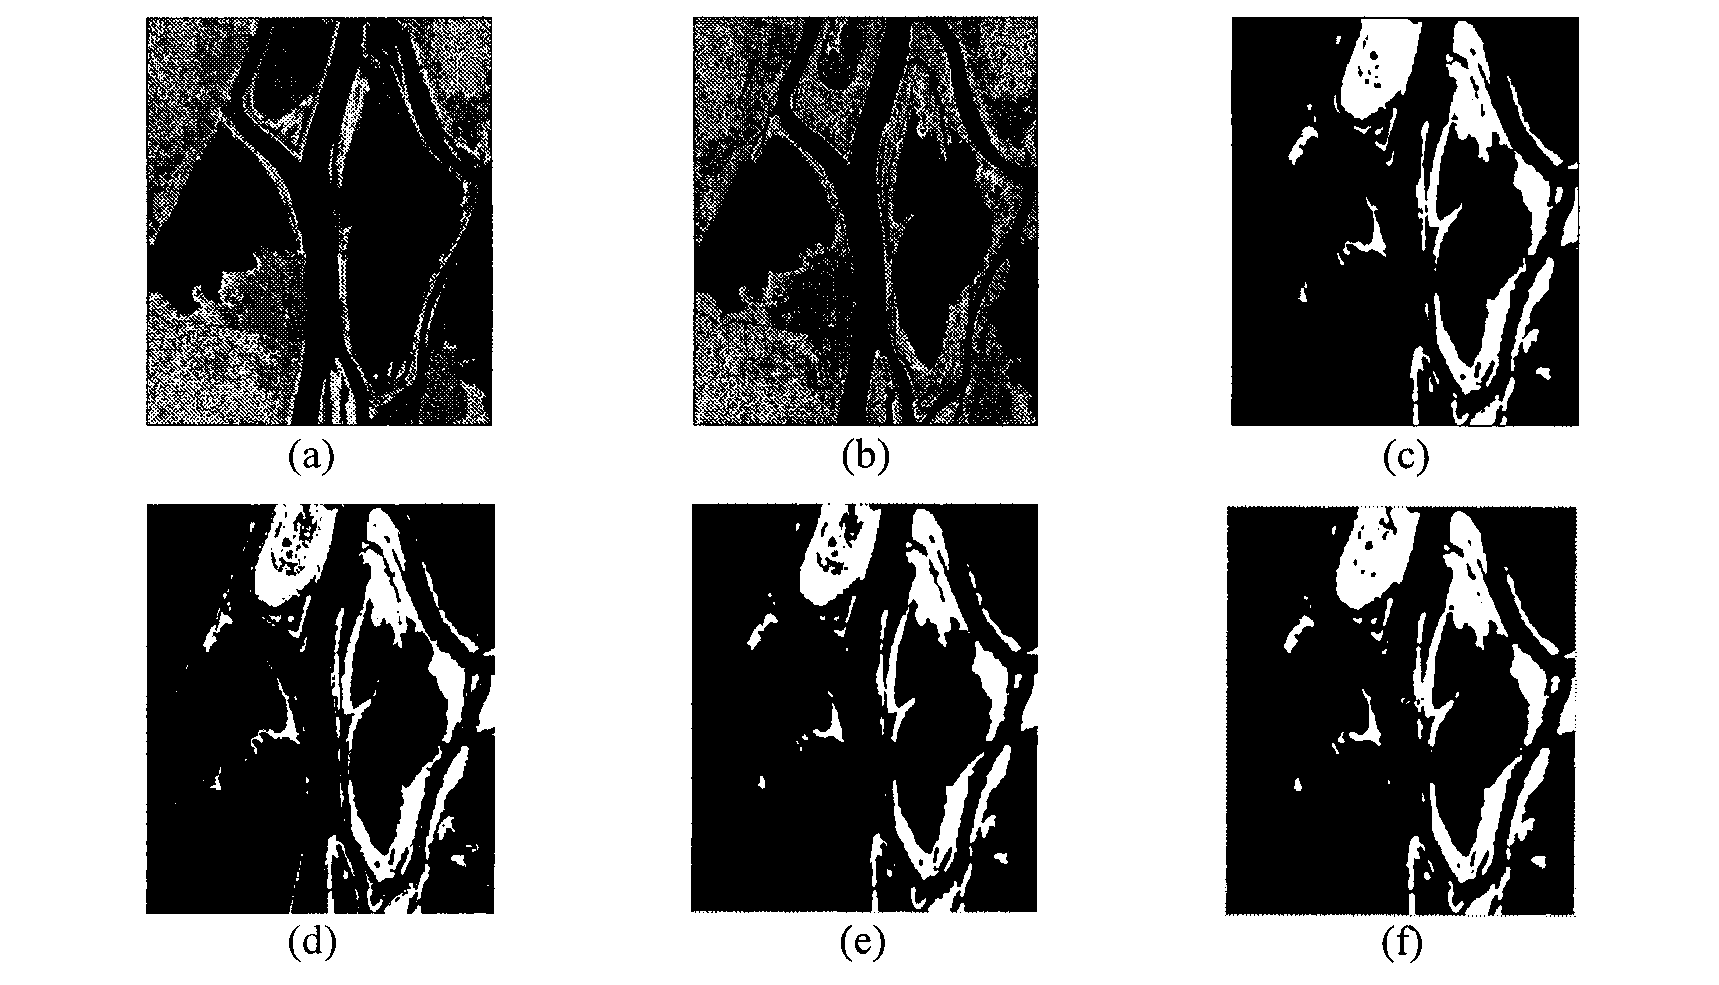 SAR (synthetic aperture radar) image change detection method combining multi-threshold segmentation with fuzzy clustering